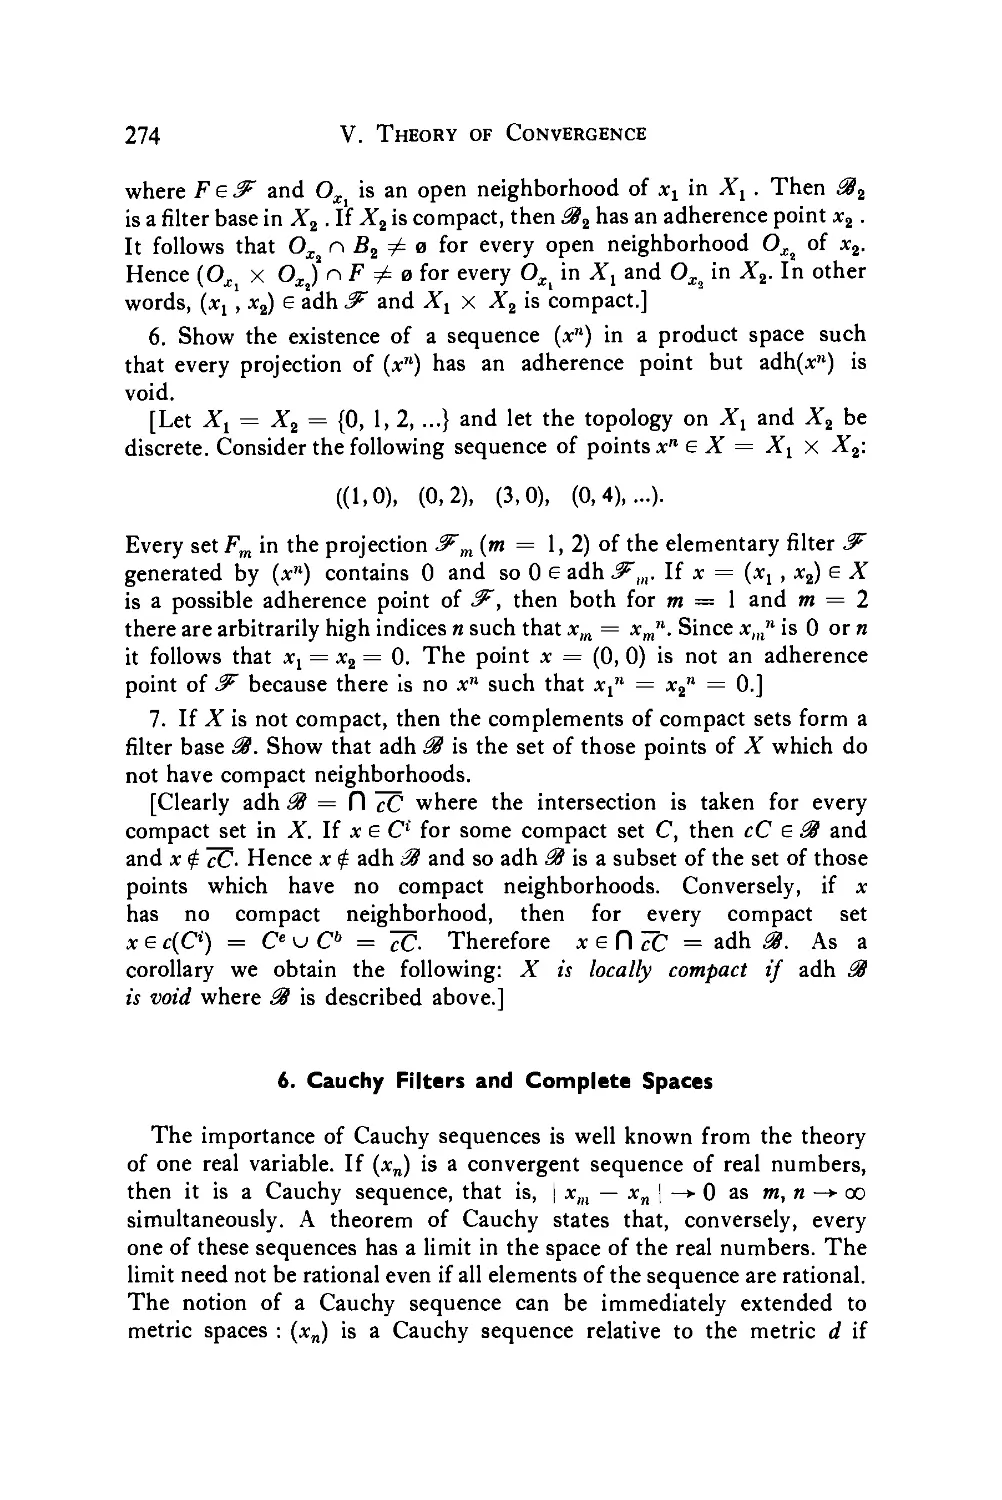 6. Cauchy Filters and Complete Spaces